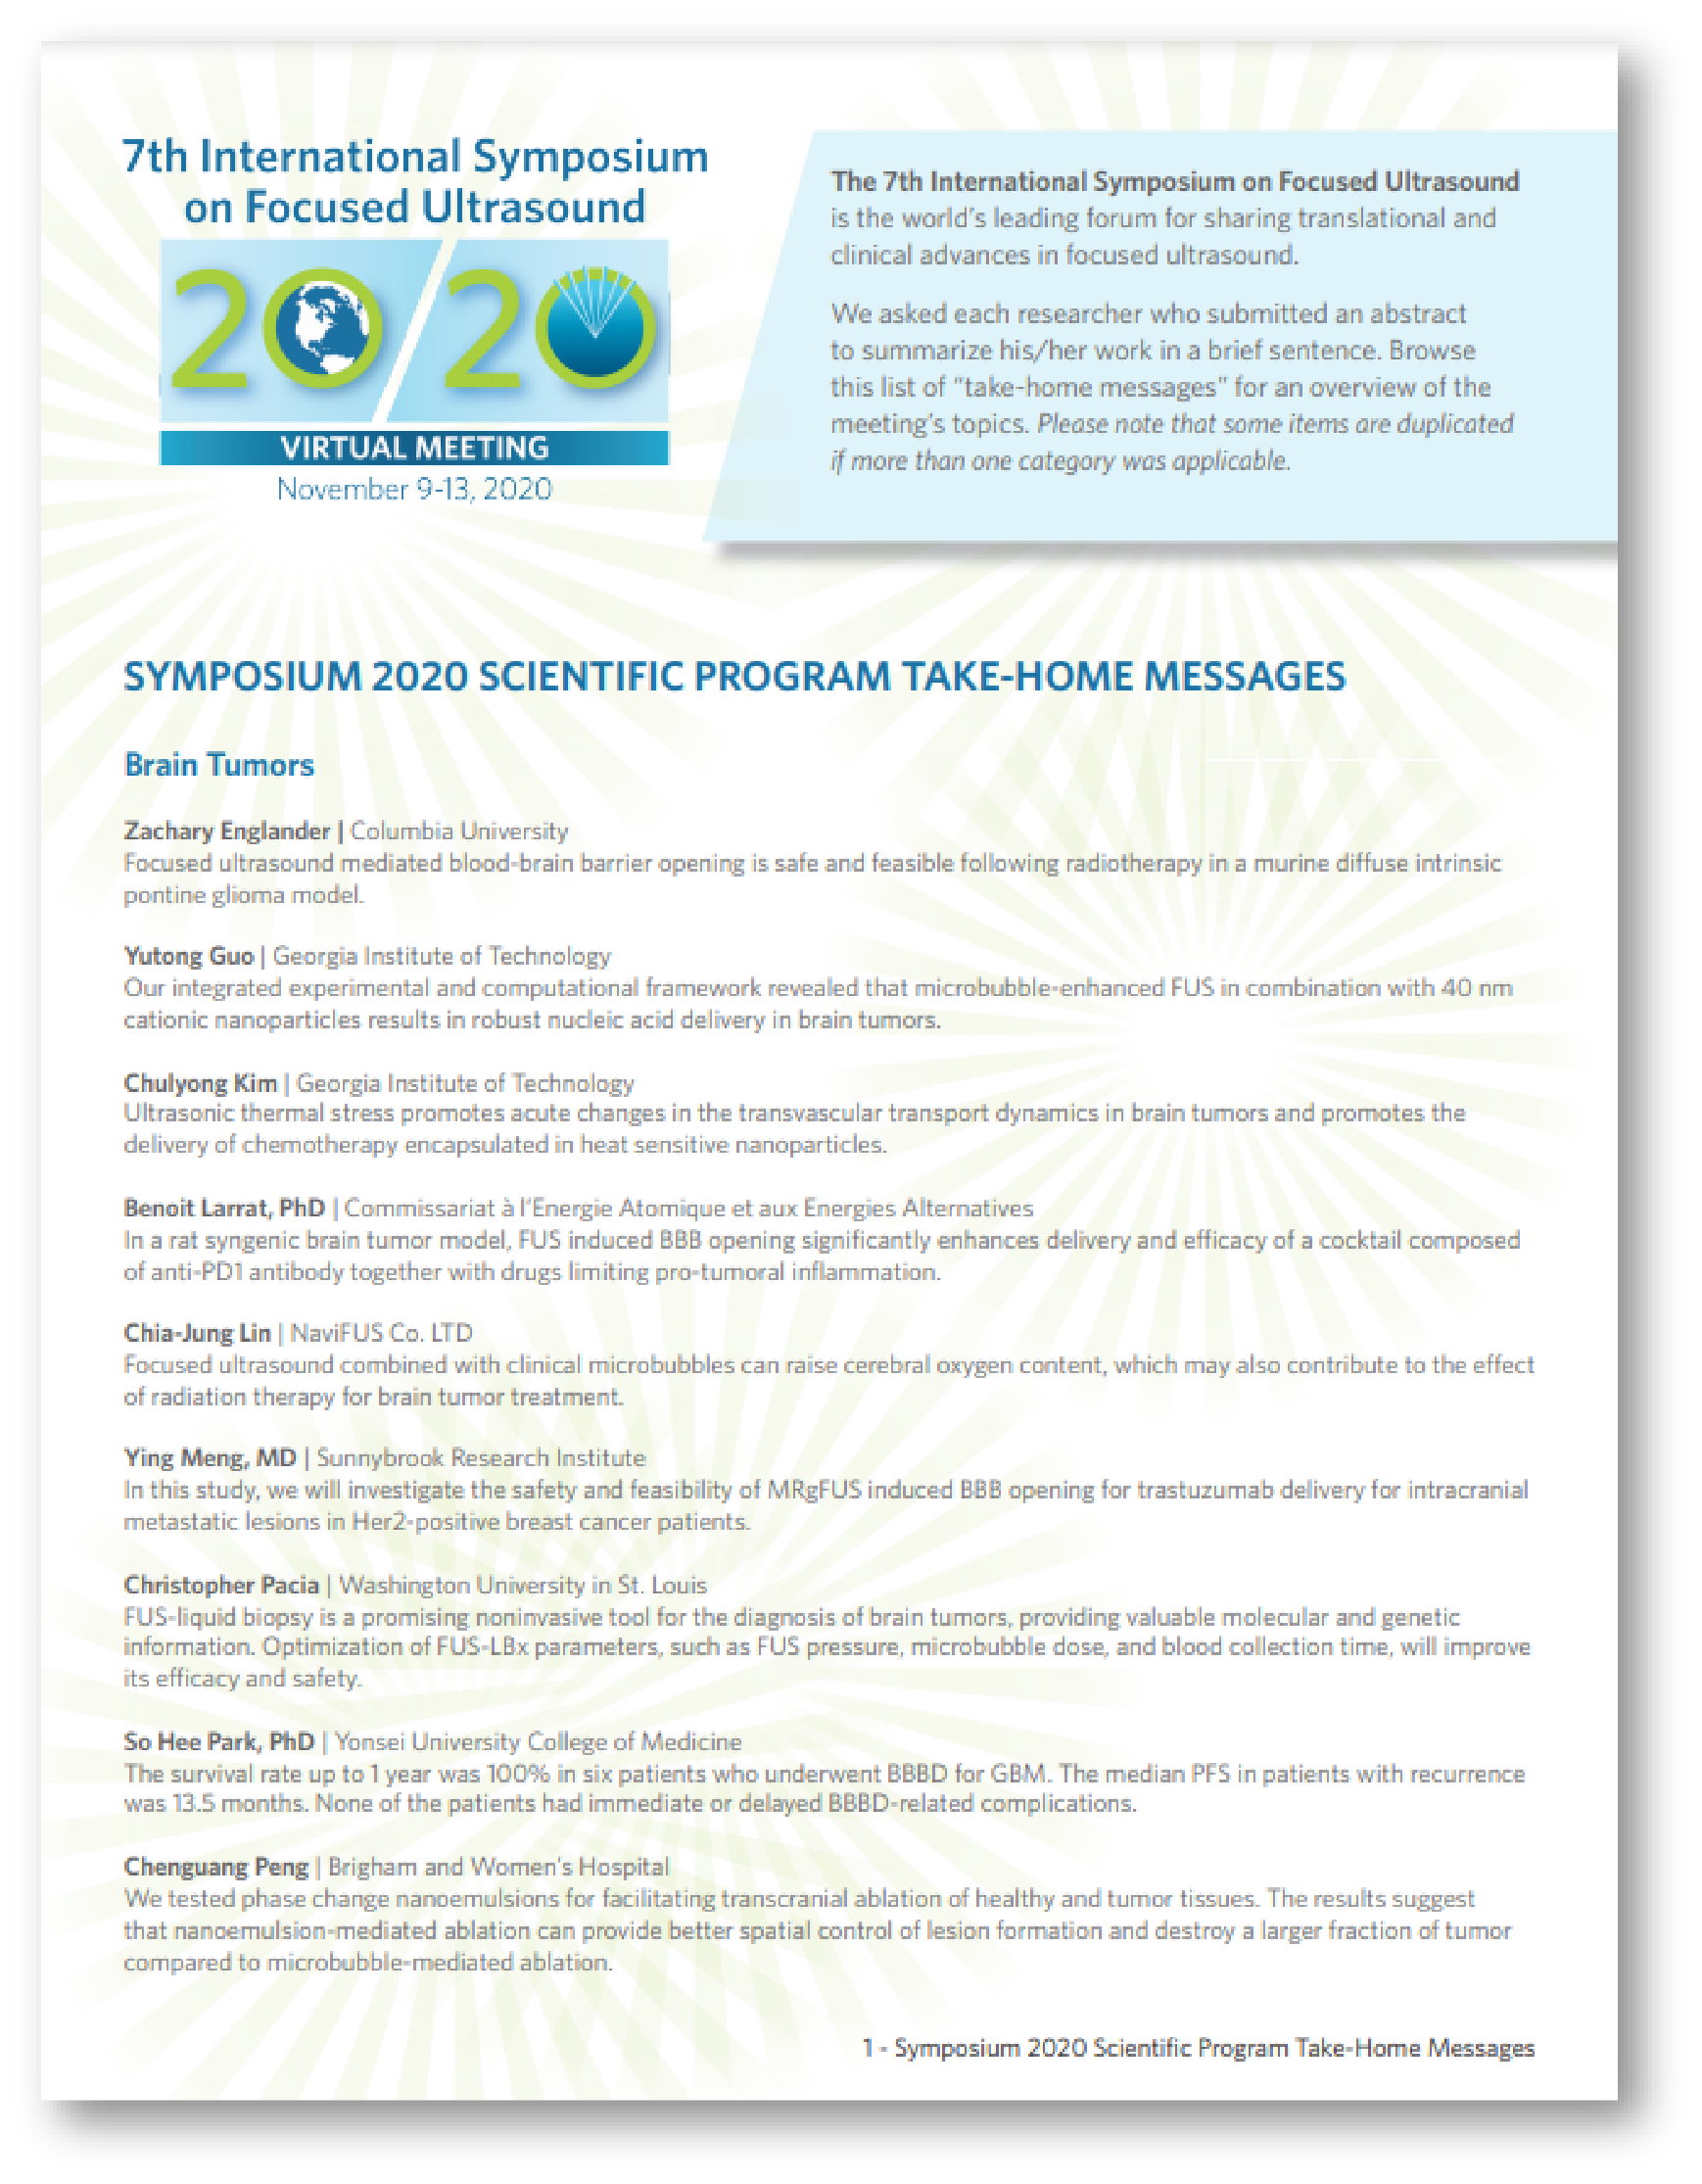 Take Home Messages front page